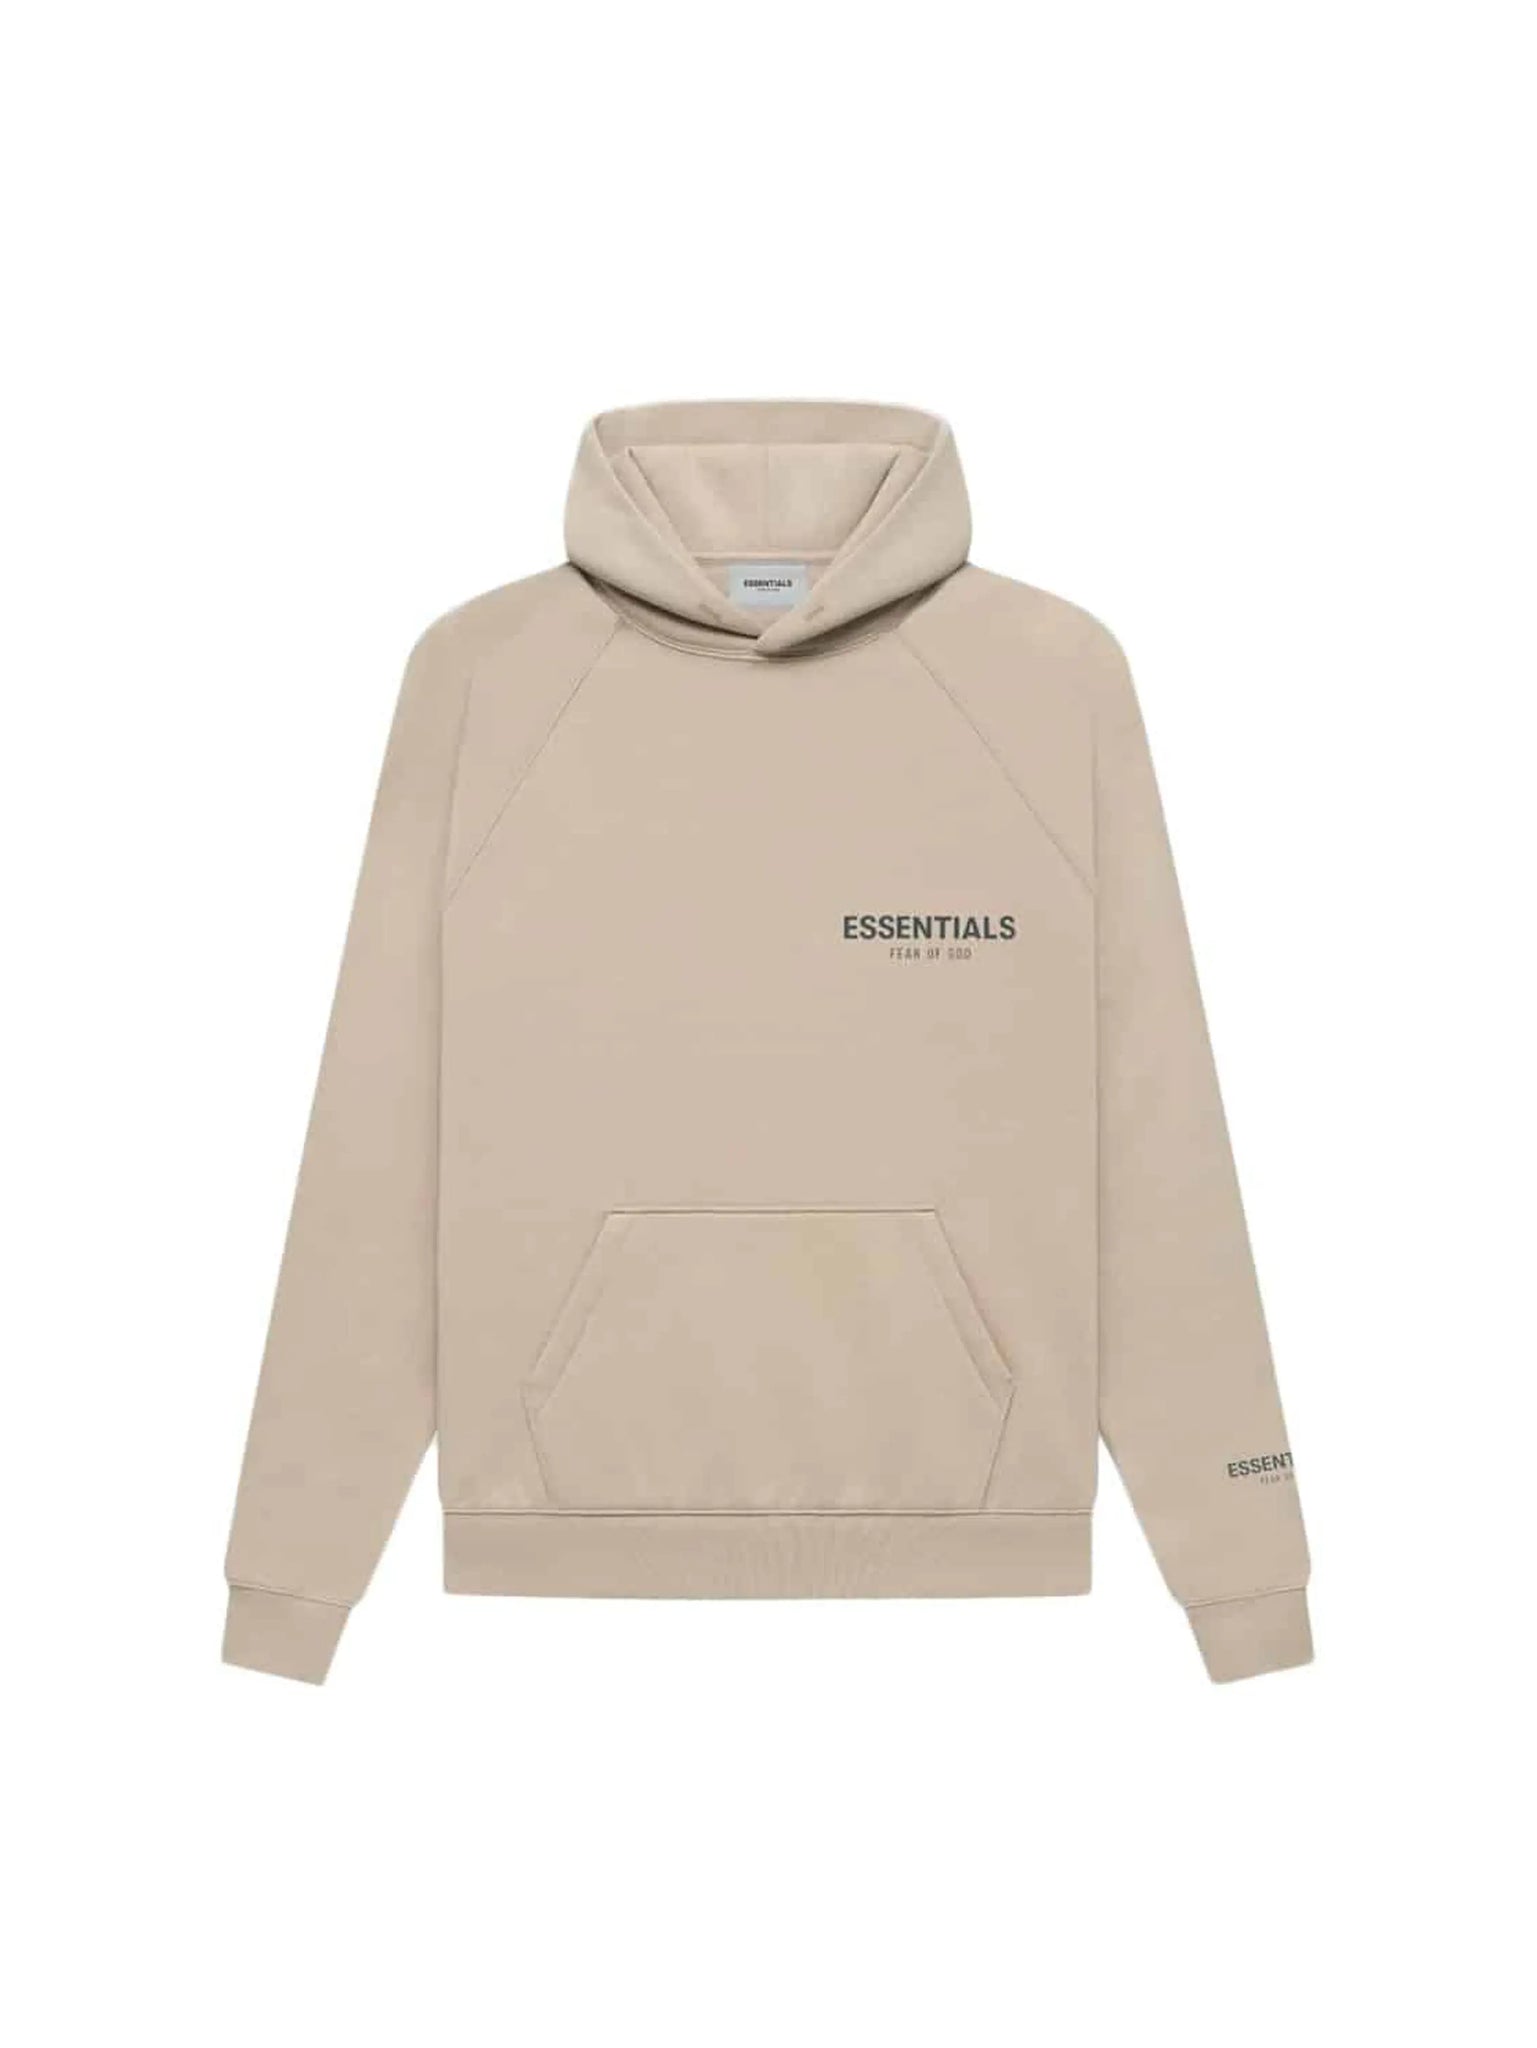 Fear of God Essentials Core Collection Pullover Hoodie String/Tan in Melbourne, Australia - Prior